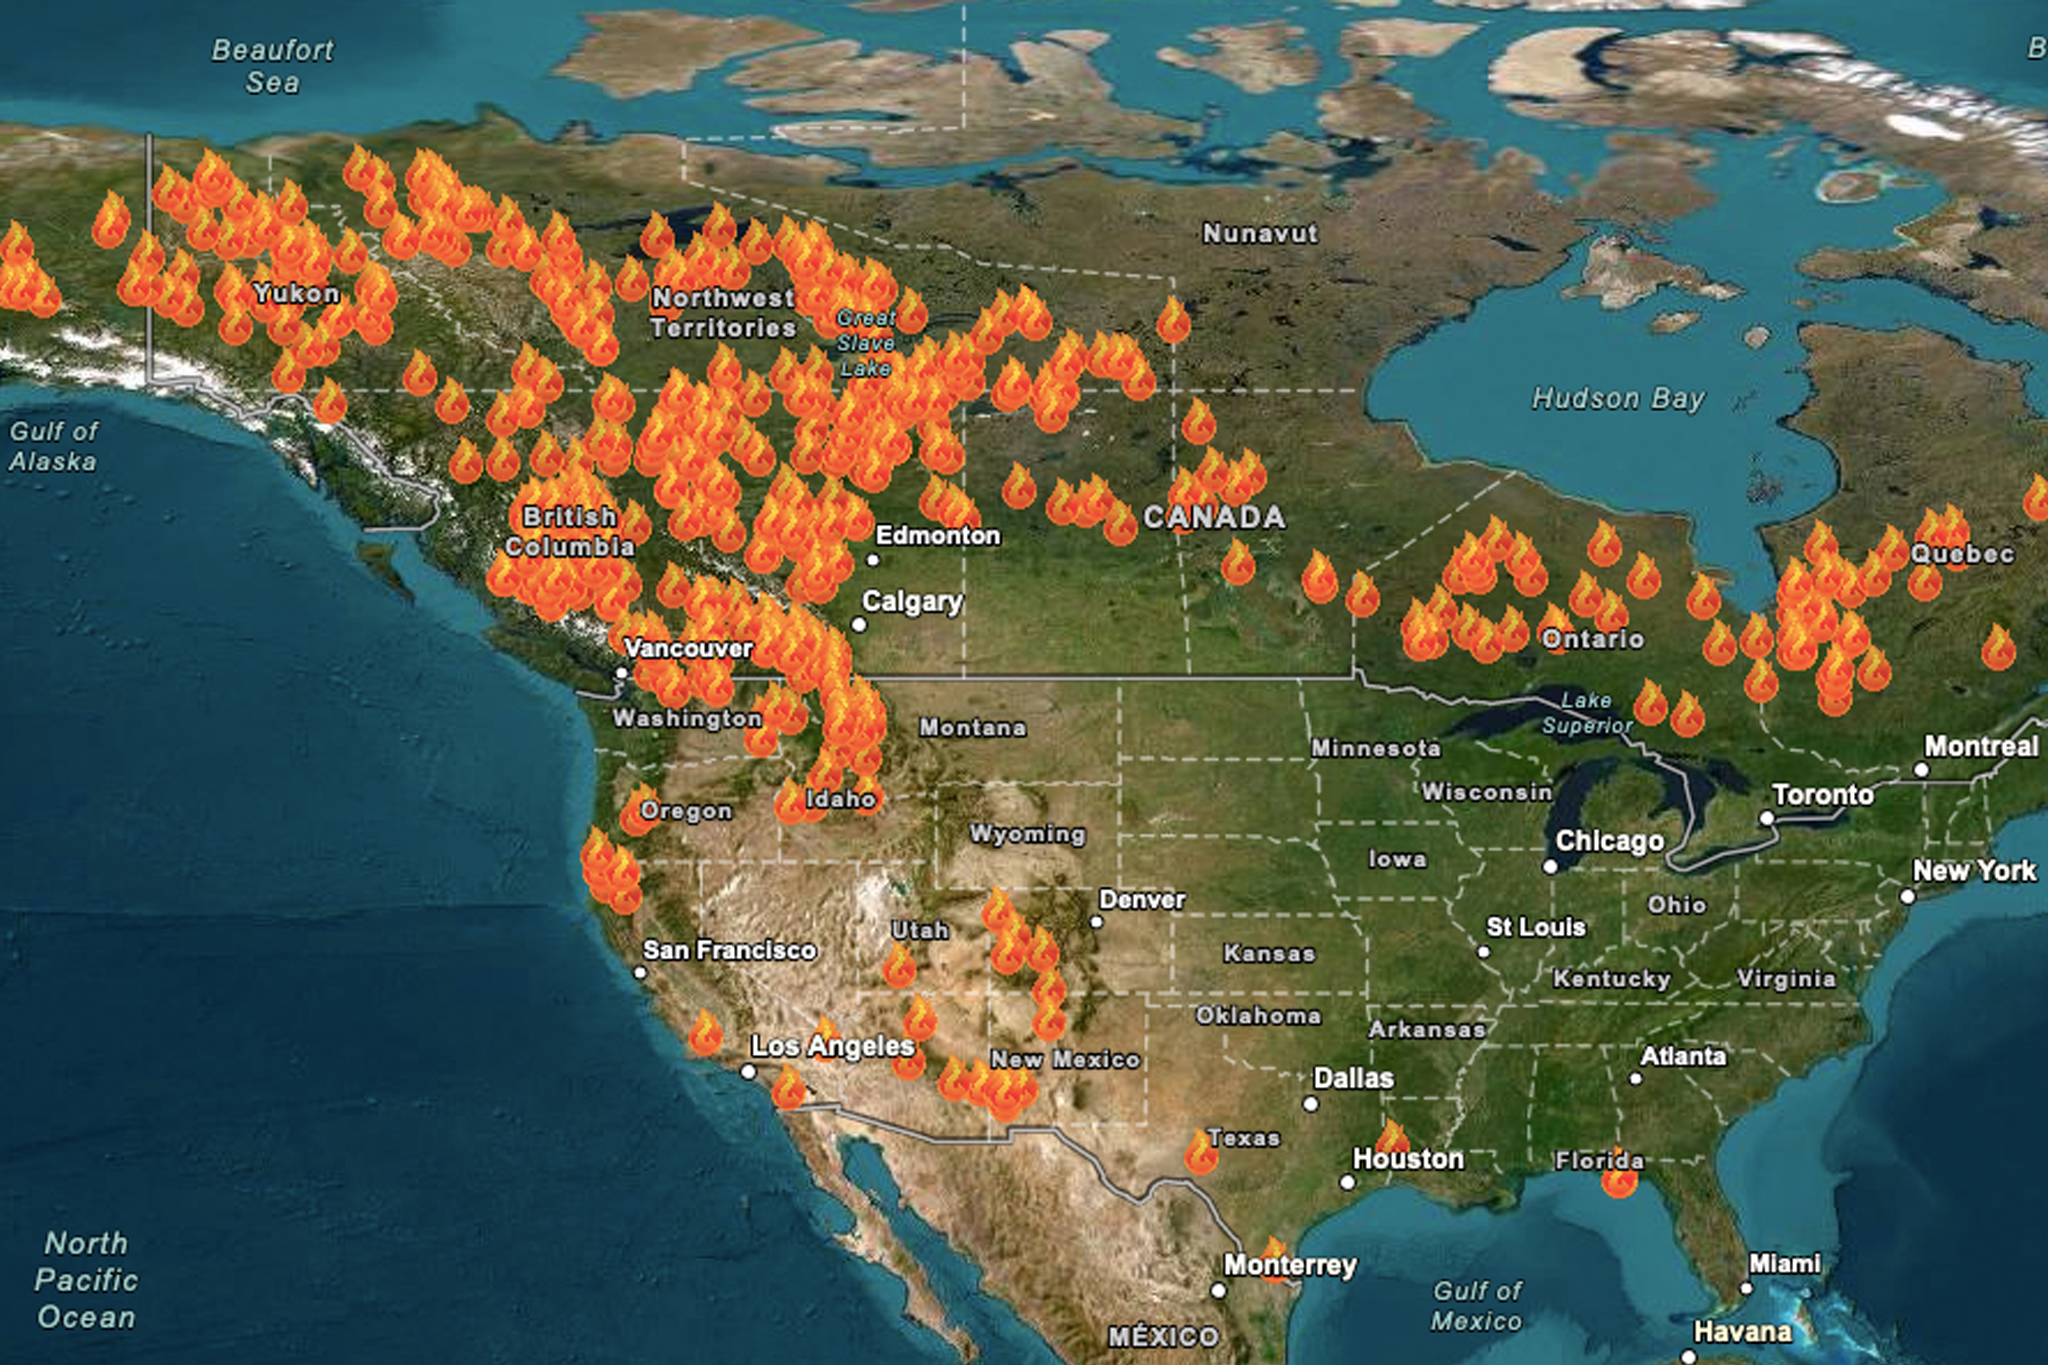 More than 1,000 wildfires are burning from coast to coast in Canada